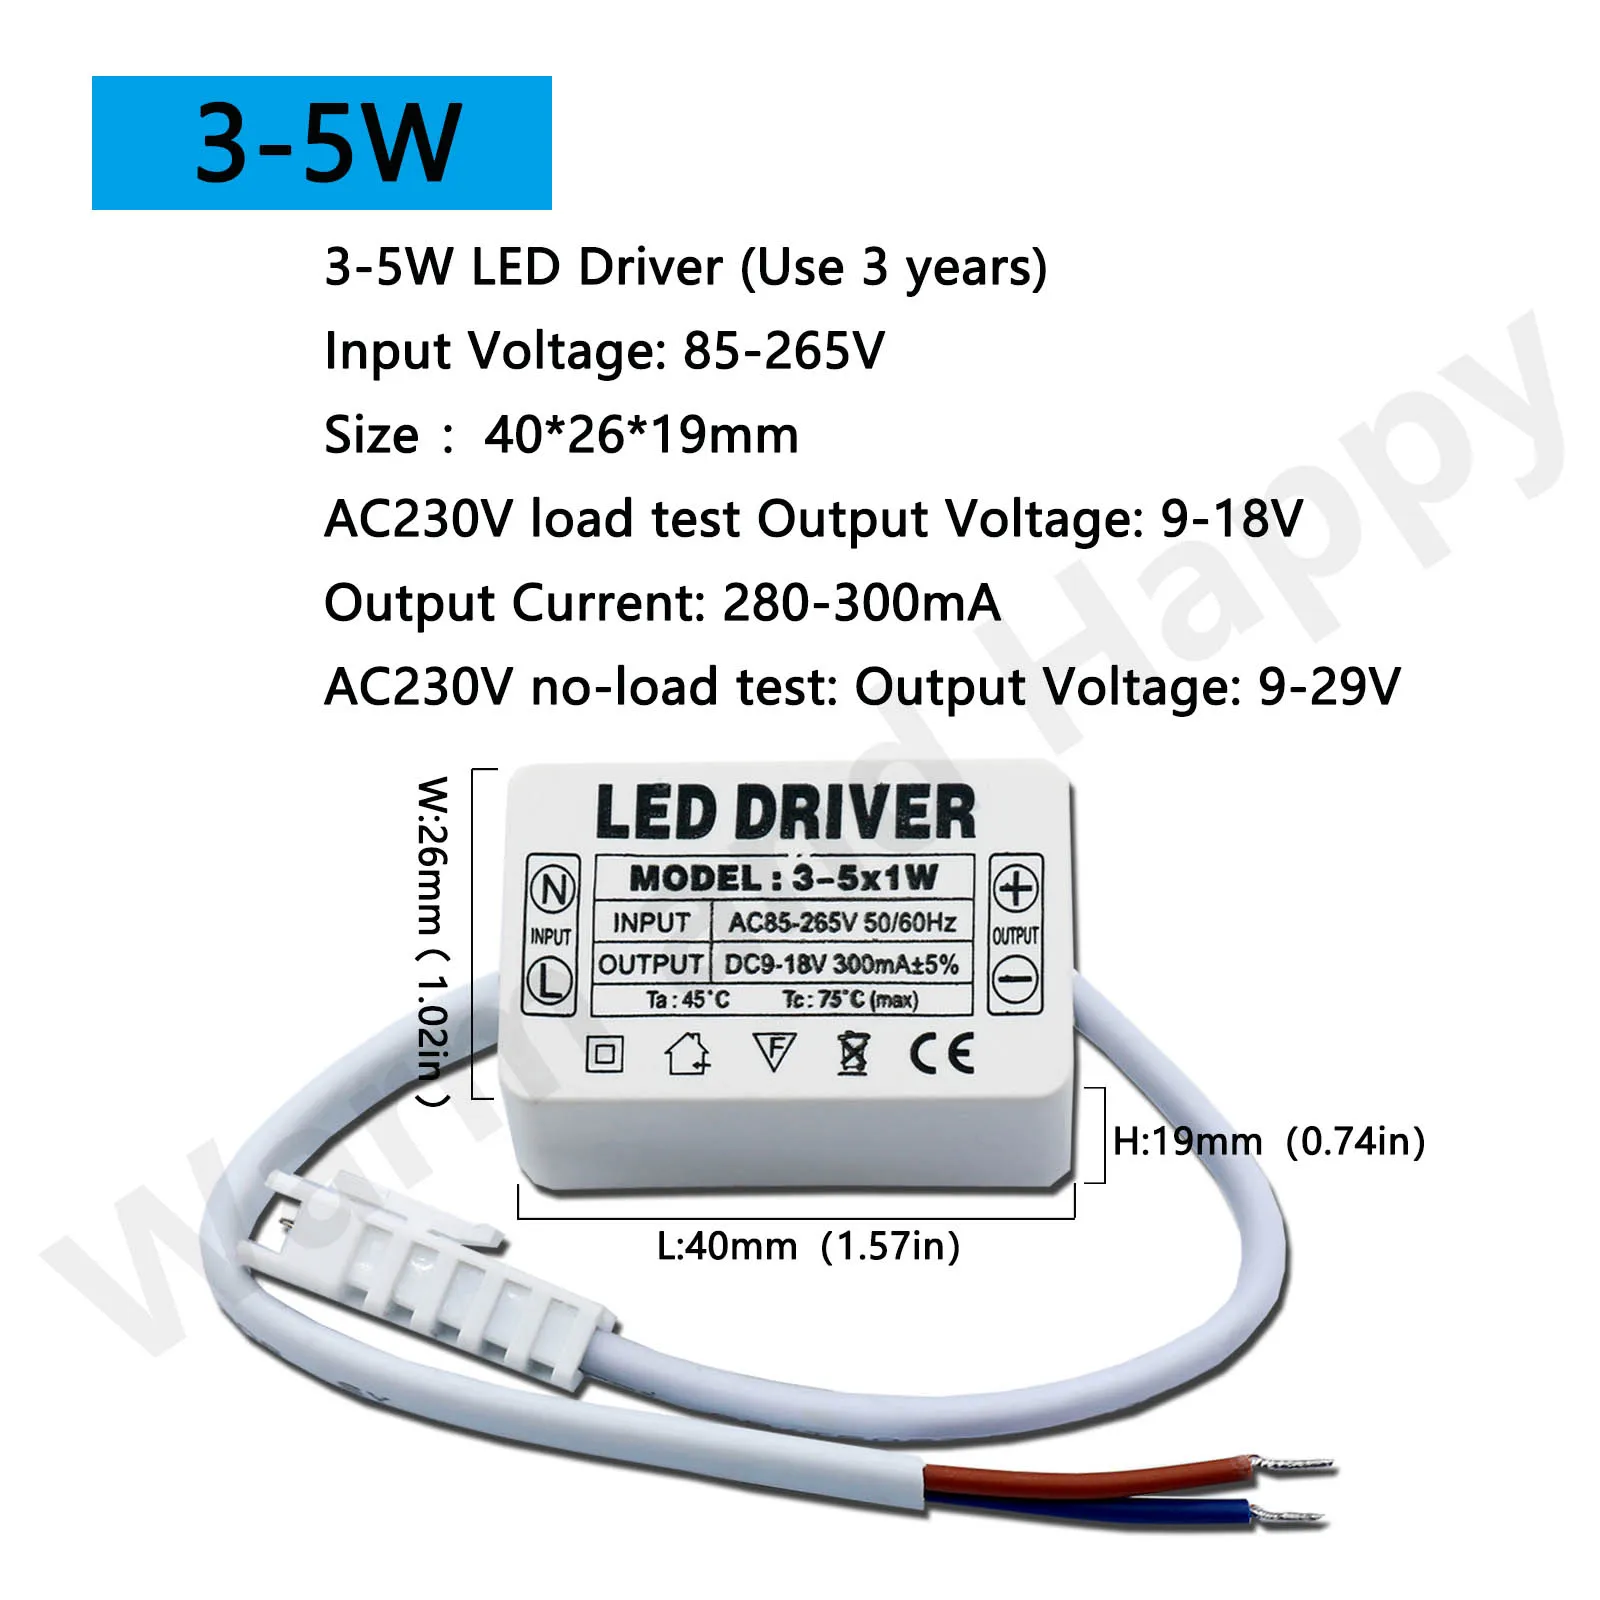 1,3 Watt LED Driver, 3-9 W, Output Voltage: 300mA9-12v at Rs 18